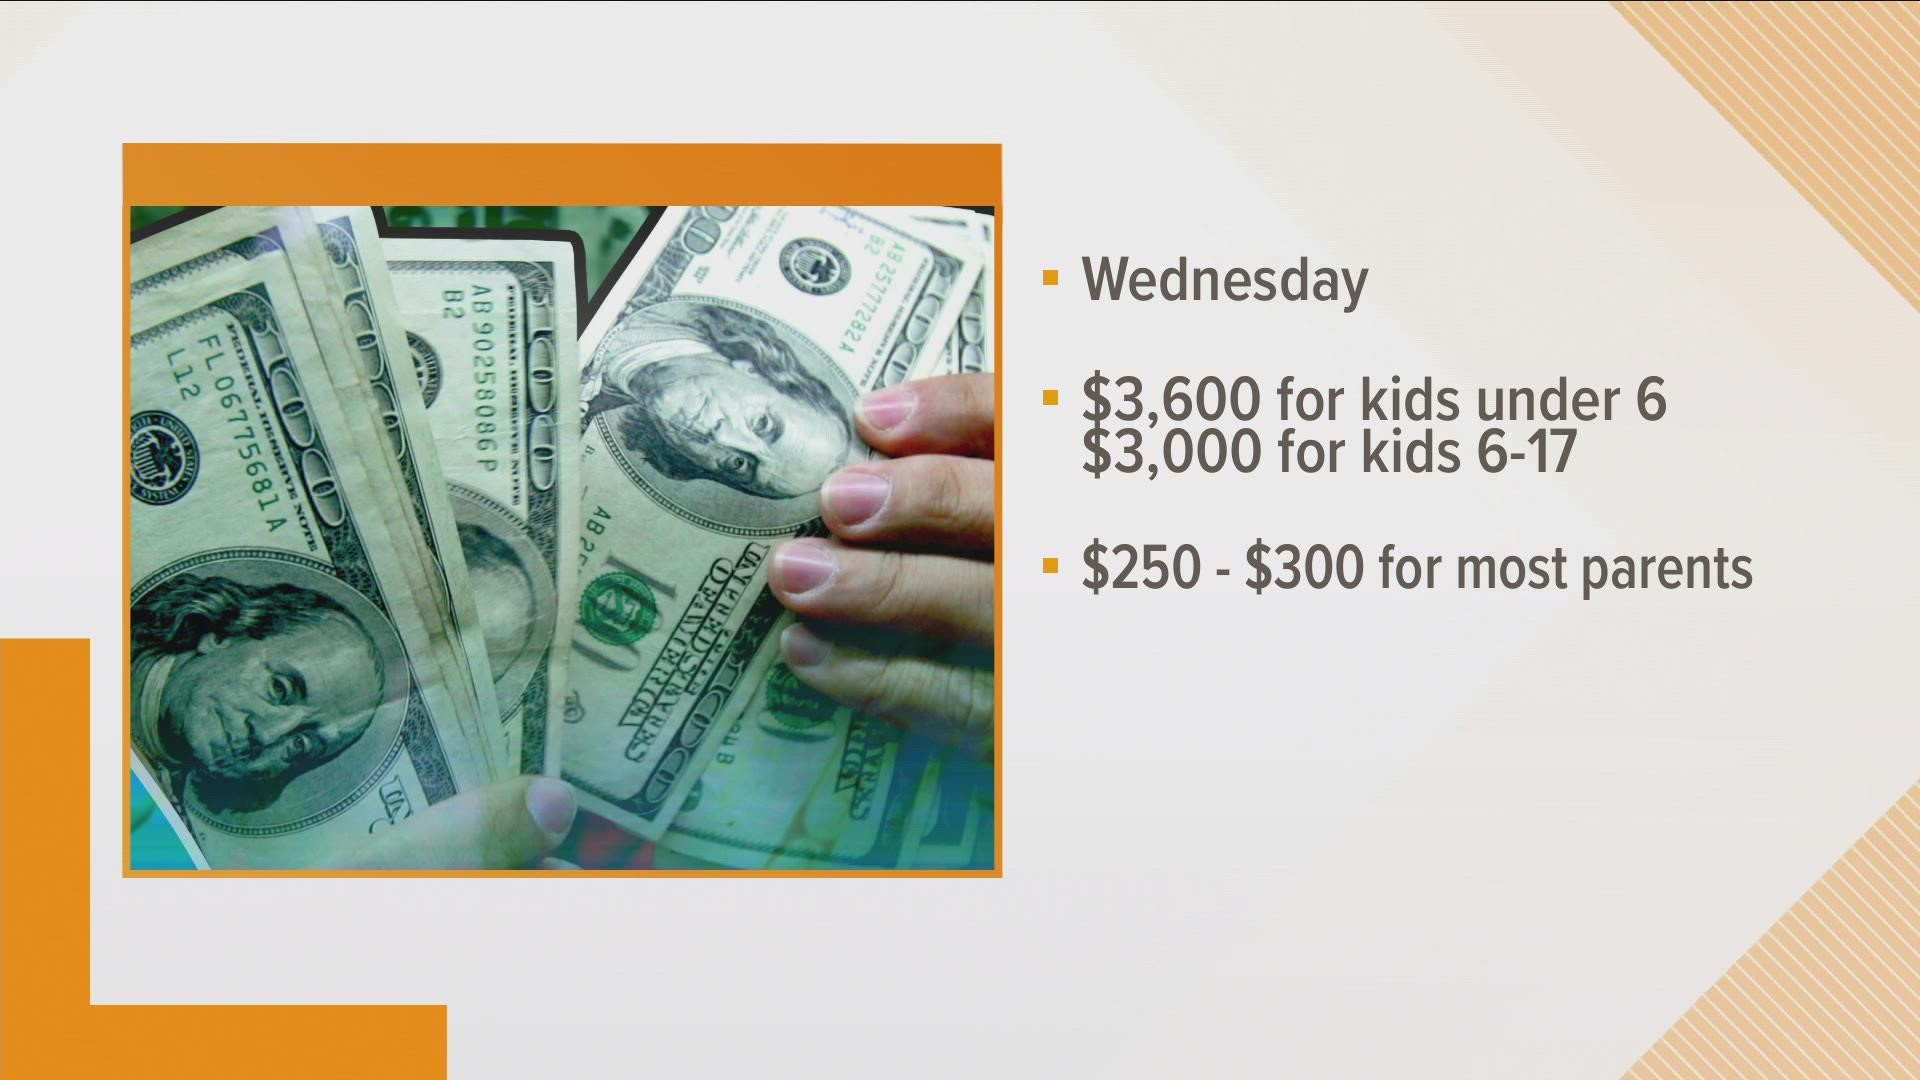 Most parents getting that monthly payment should get 250 to 300 dollars per child.